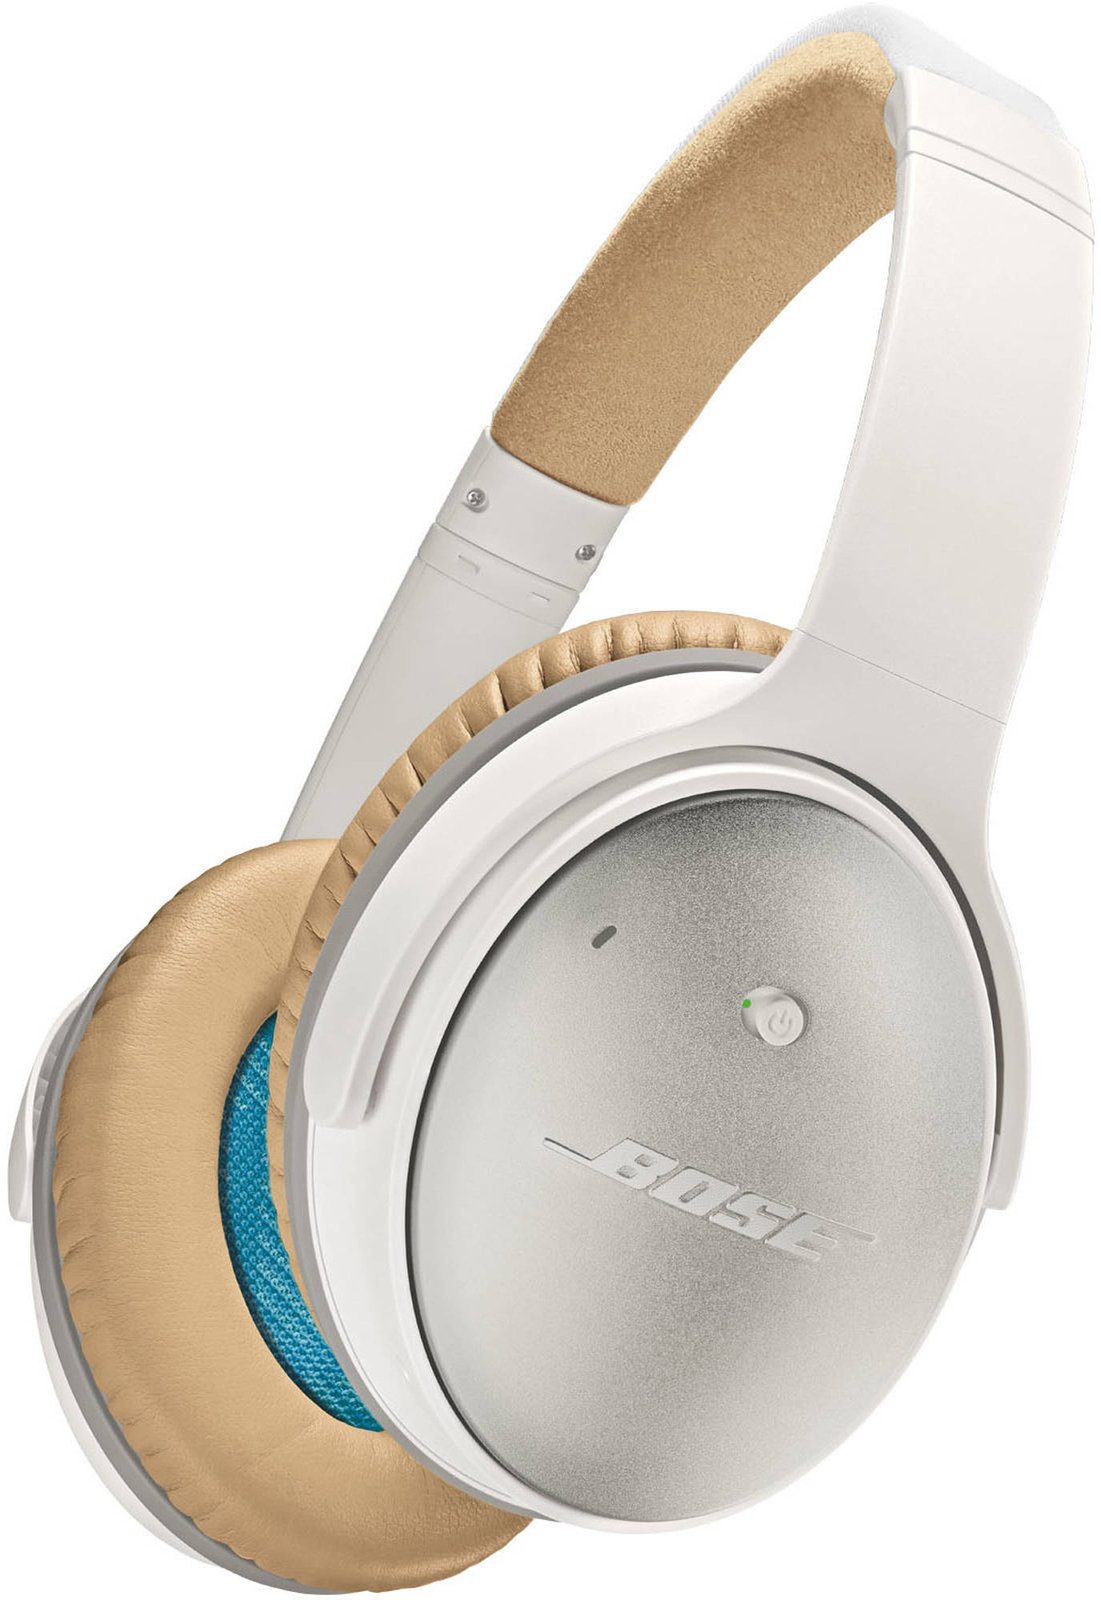 Broadcast-headset Bose QuietComfort 25 Android White